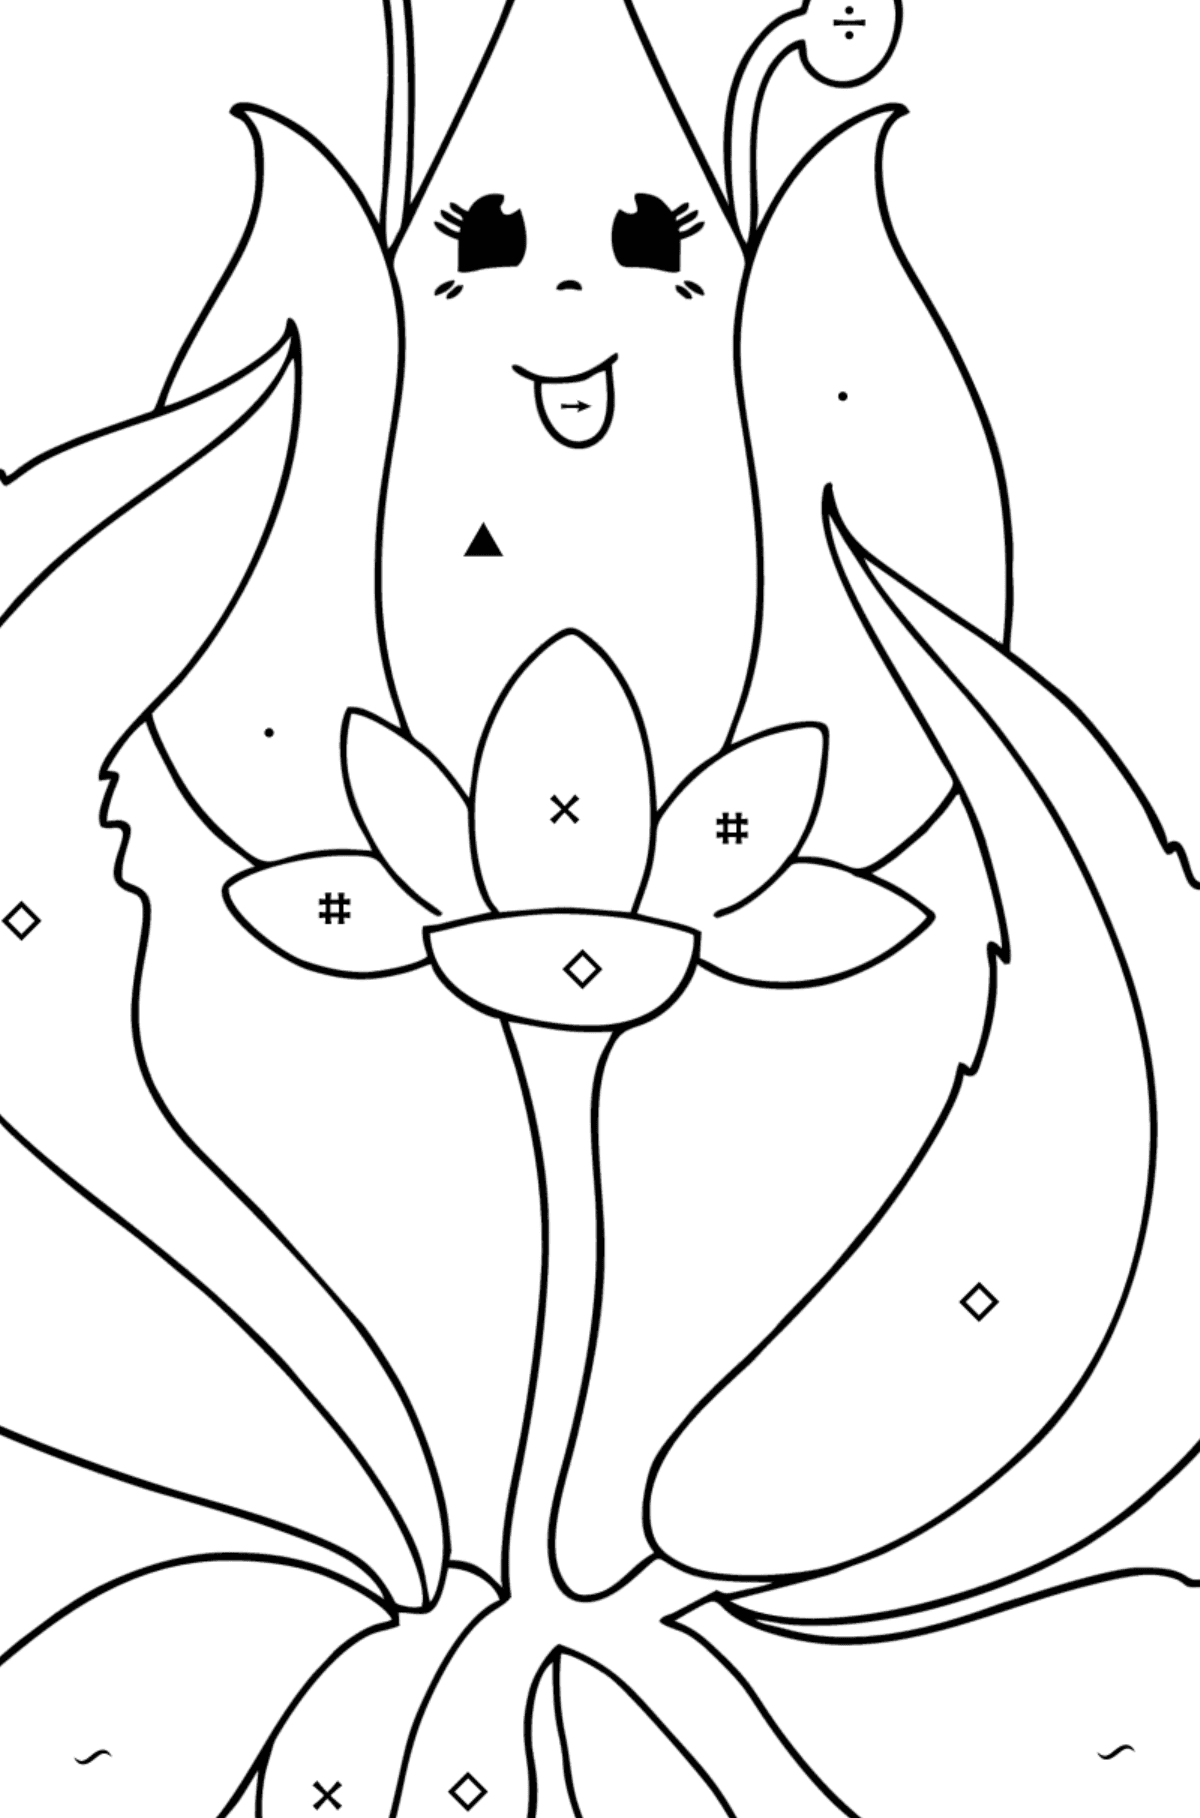 Bud with eyes coloring page - Coloring by Symbols for Kids